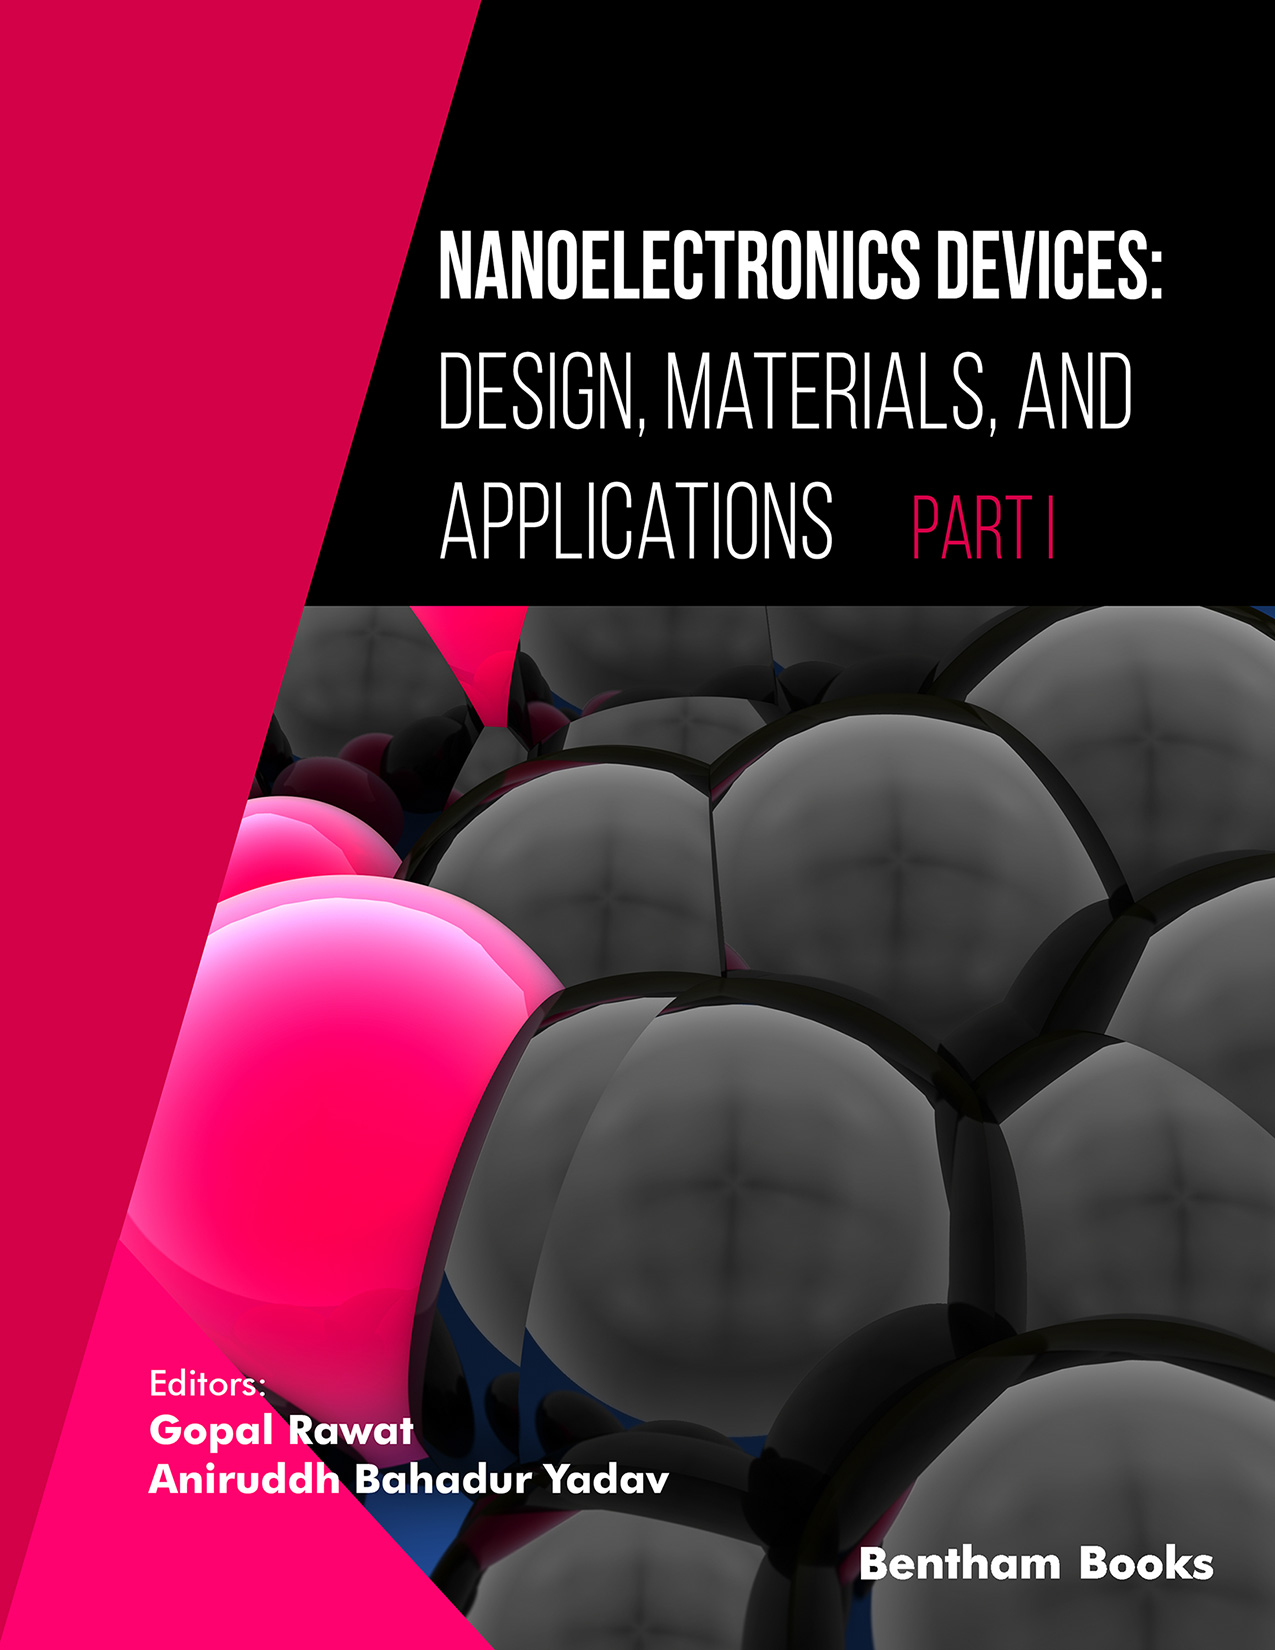 Nanoelectronics Devices: Design, Materials, and Applications Part I